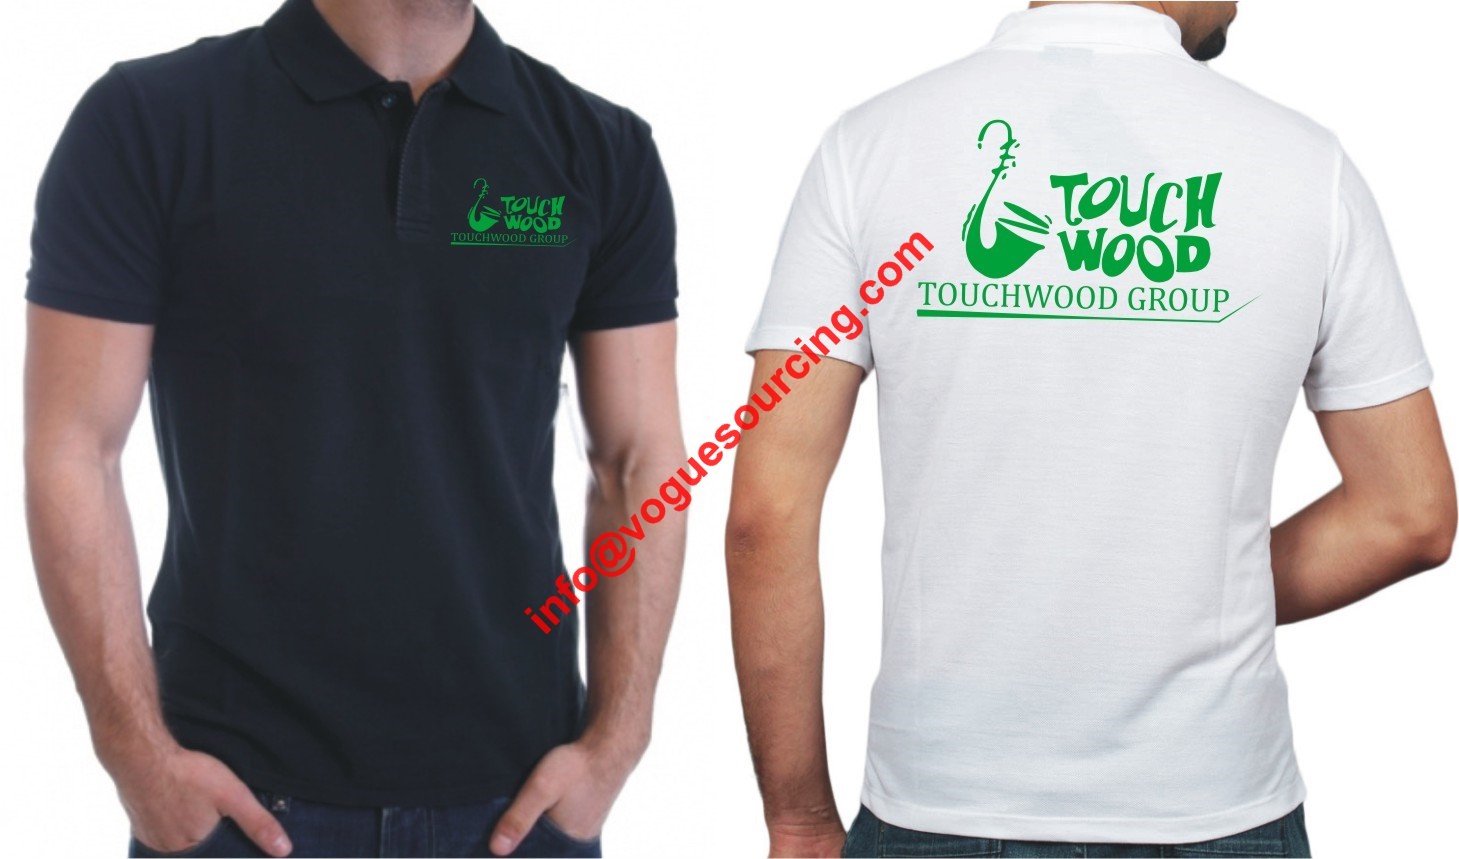 corporate-polo-shirt-manufacturers-suppliers-exporters-voguesourcing-tirupur-india